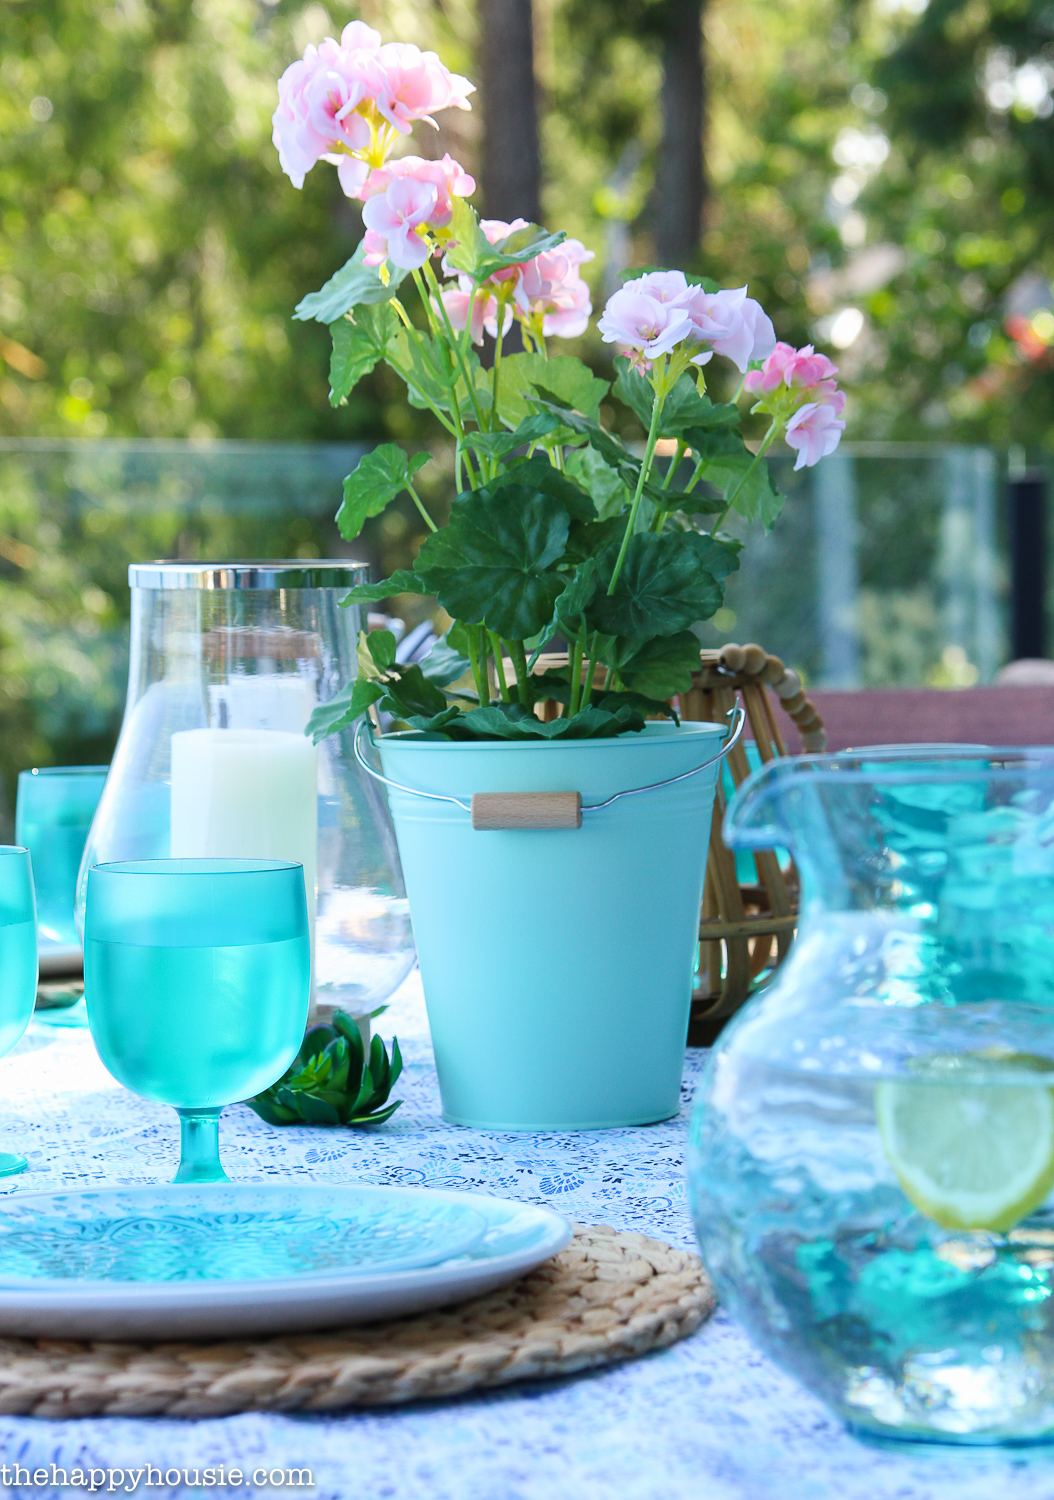 A light blue bucket planter with the light pink flowers.